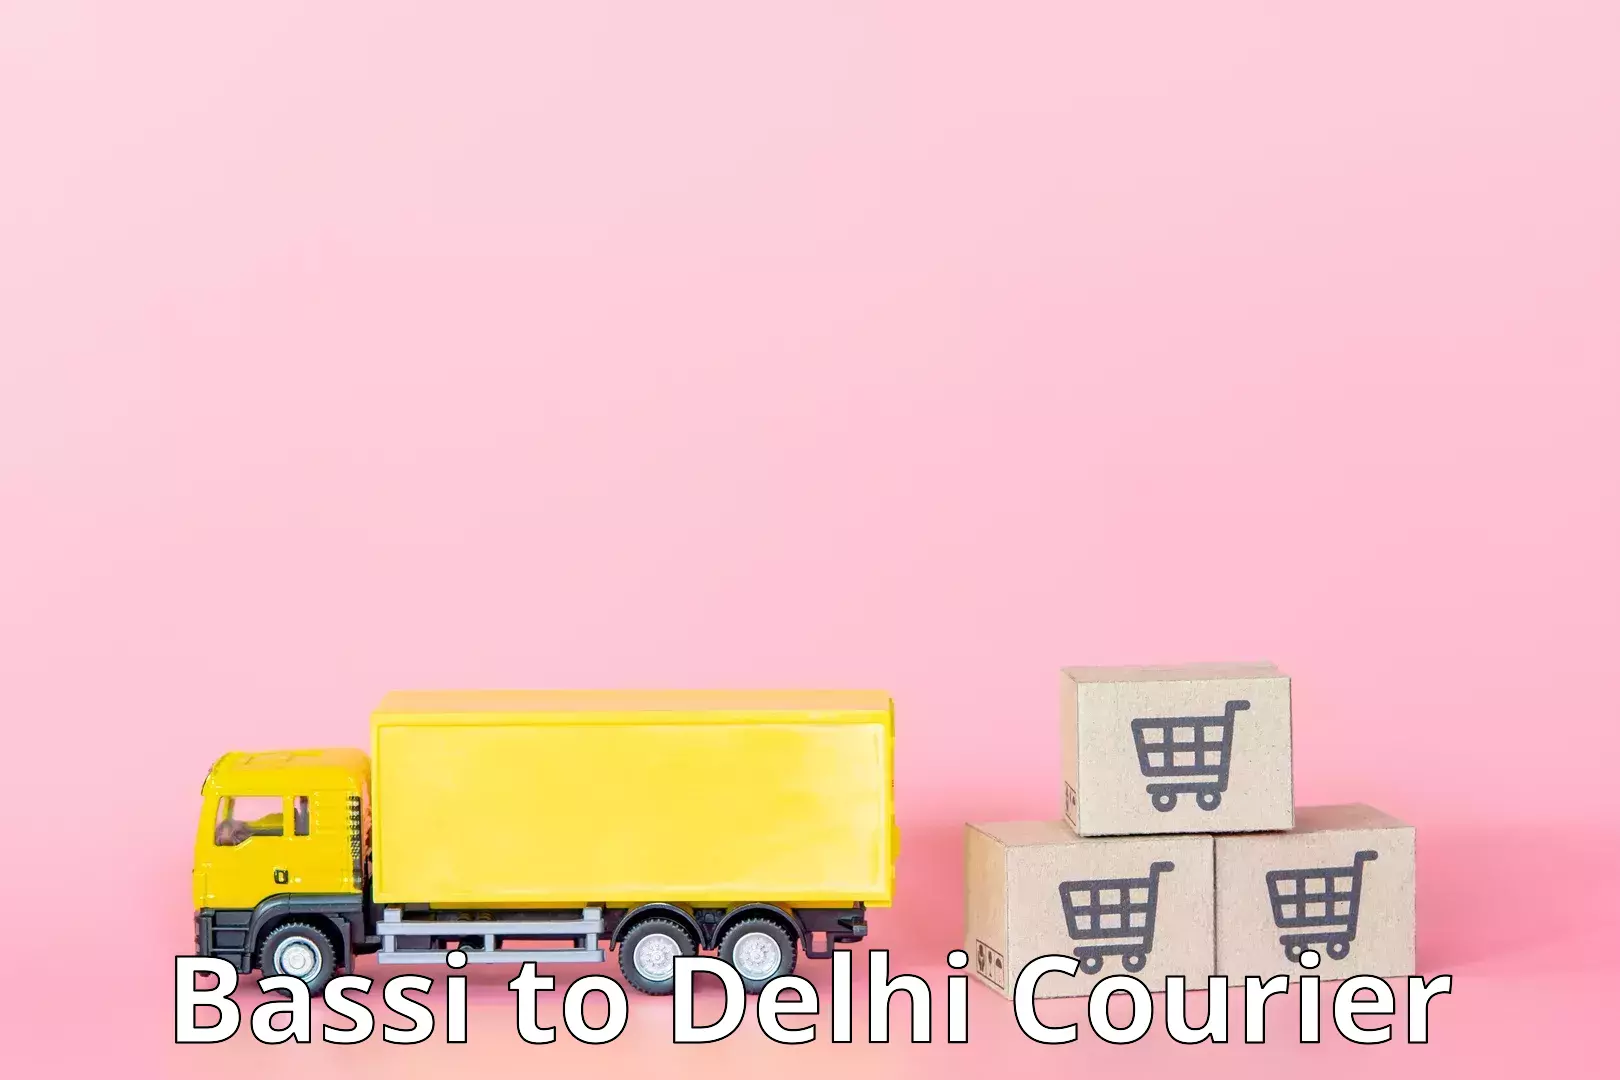 Air courier services Bassi to Delhi